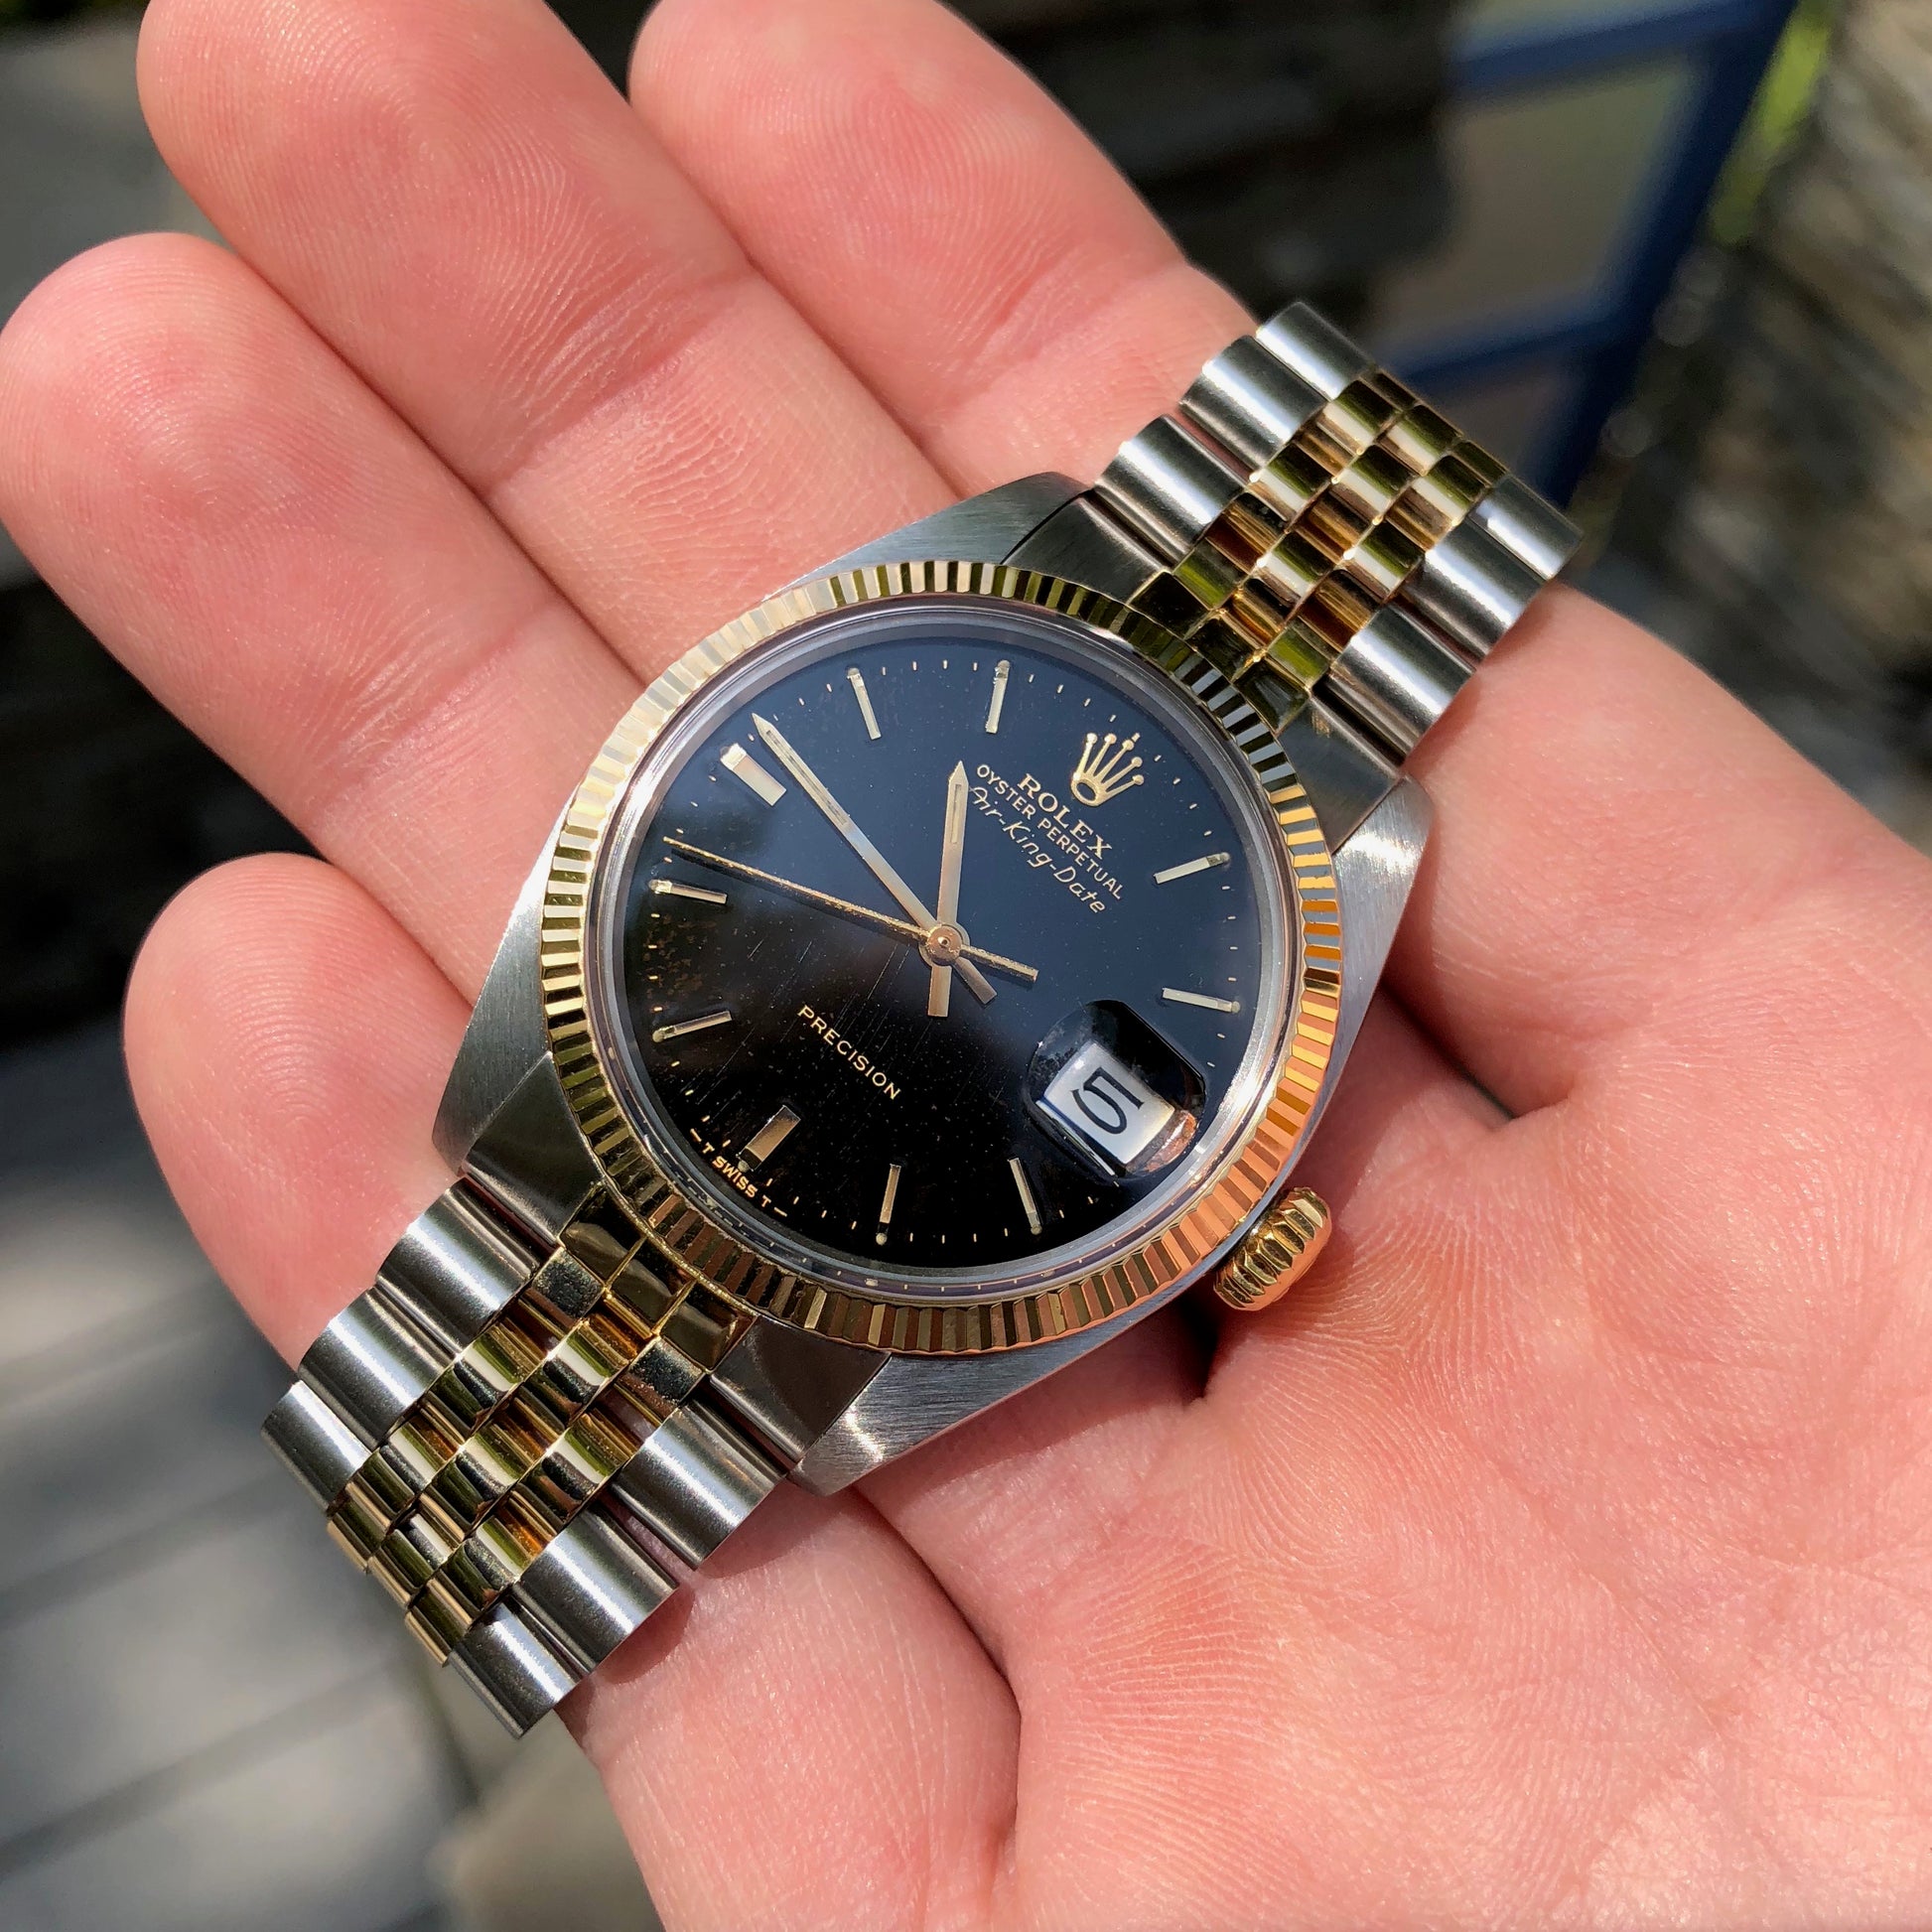 Vintage Rolex Air King Date 5701 Two Tone Steel Gold Black Caliber 1570 Automatic Wristwatch - Hashtag Watch Company